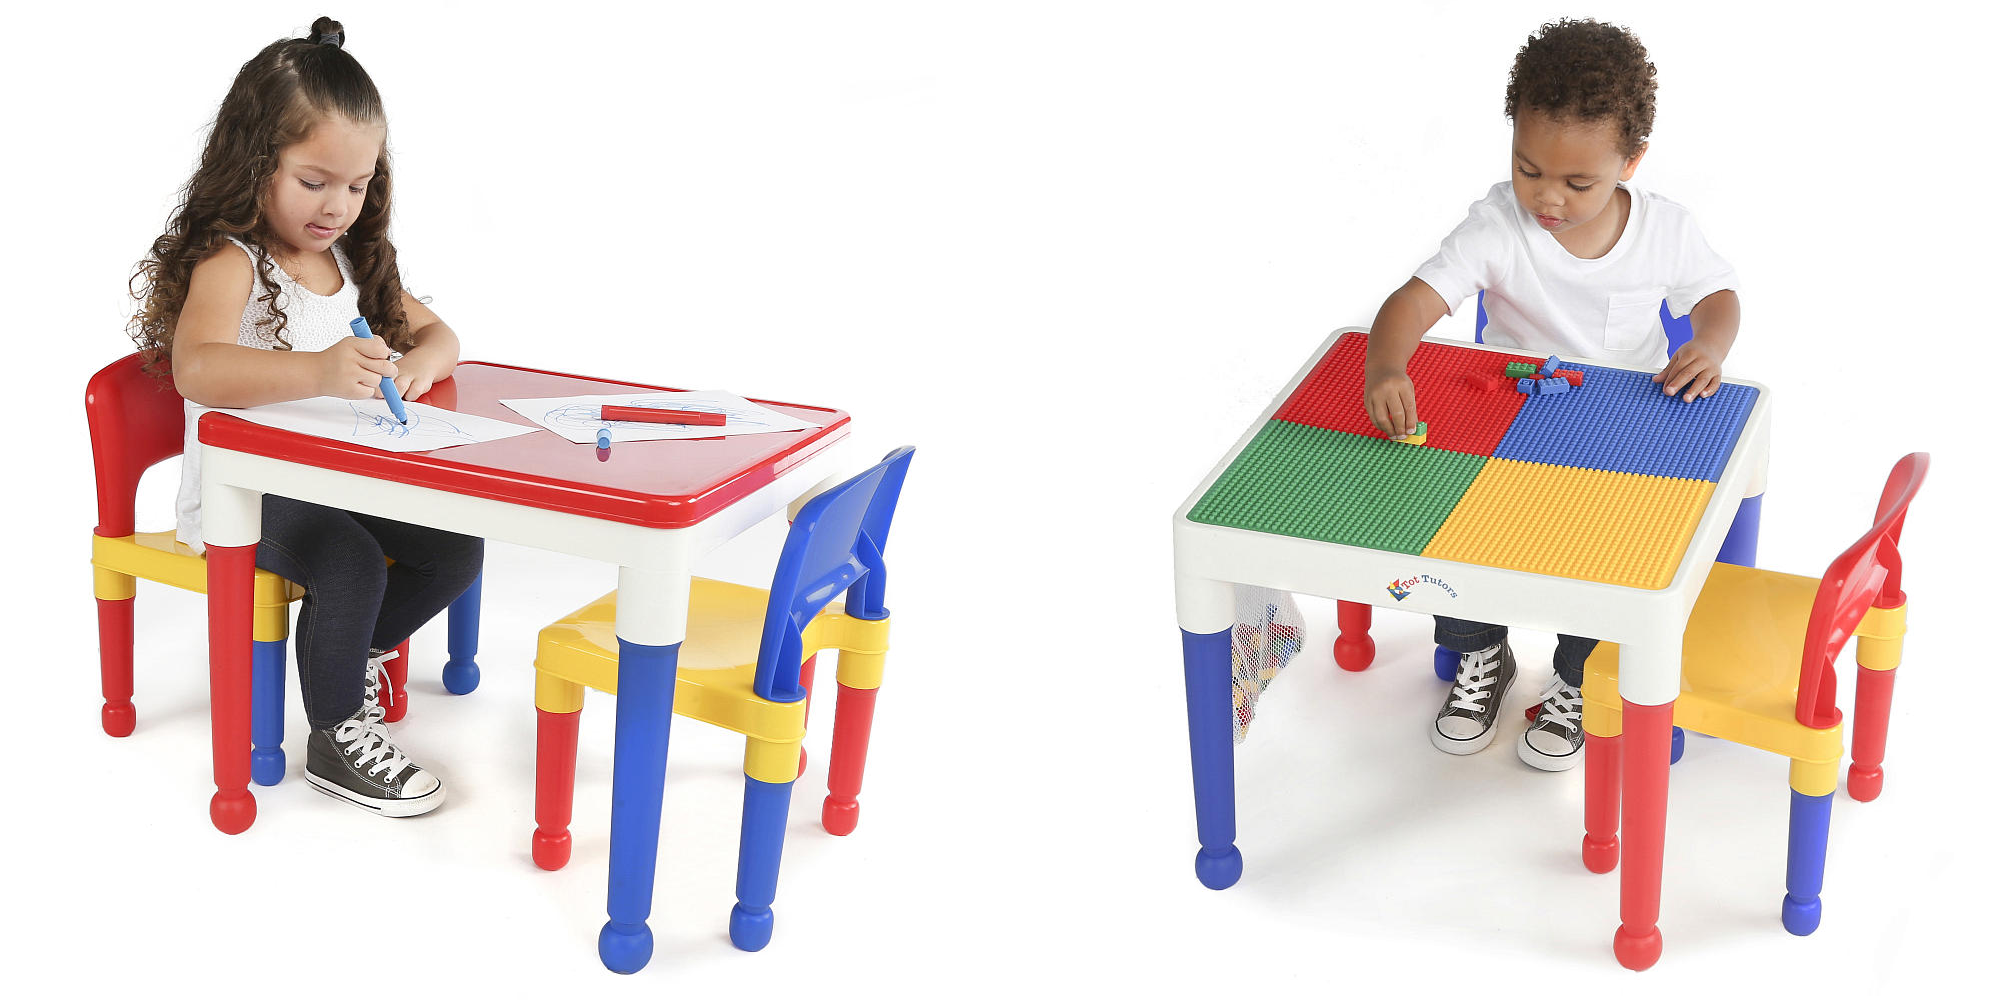 Tot Tutors 2-in-1 Plastic Construction Table Set Just $29.99! FREE Shipping!